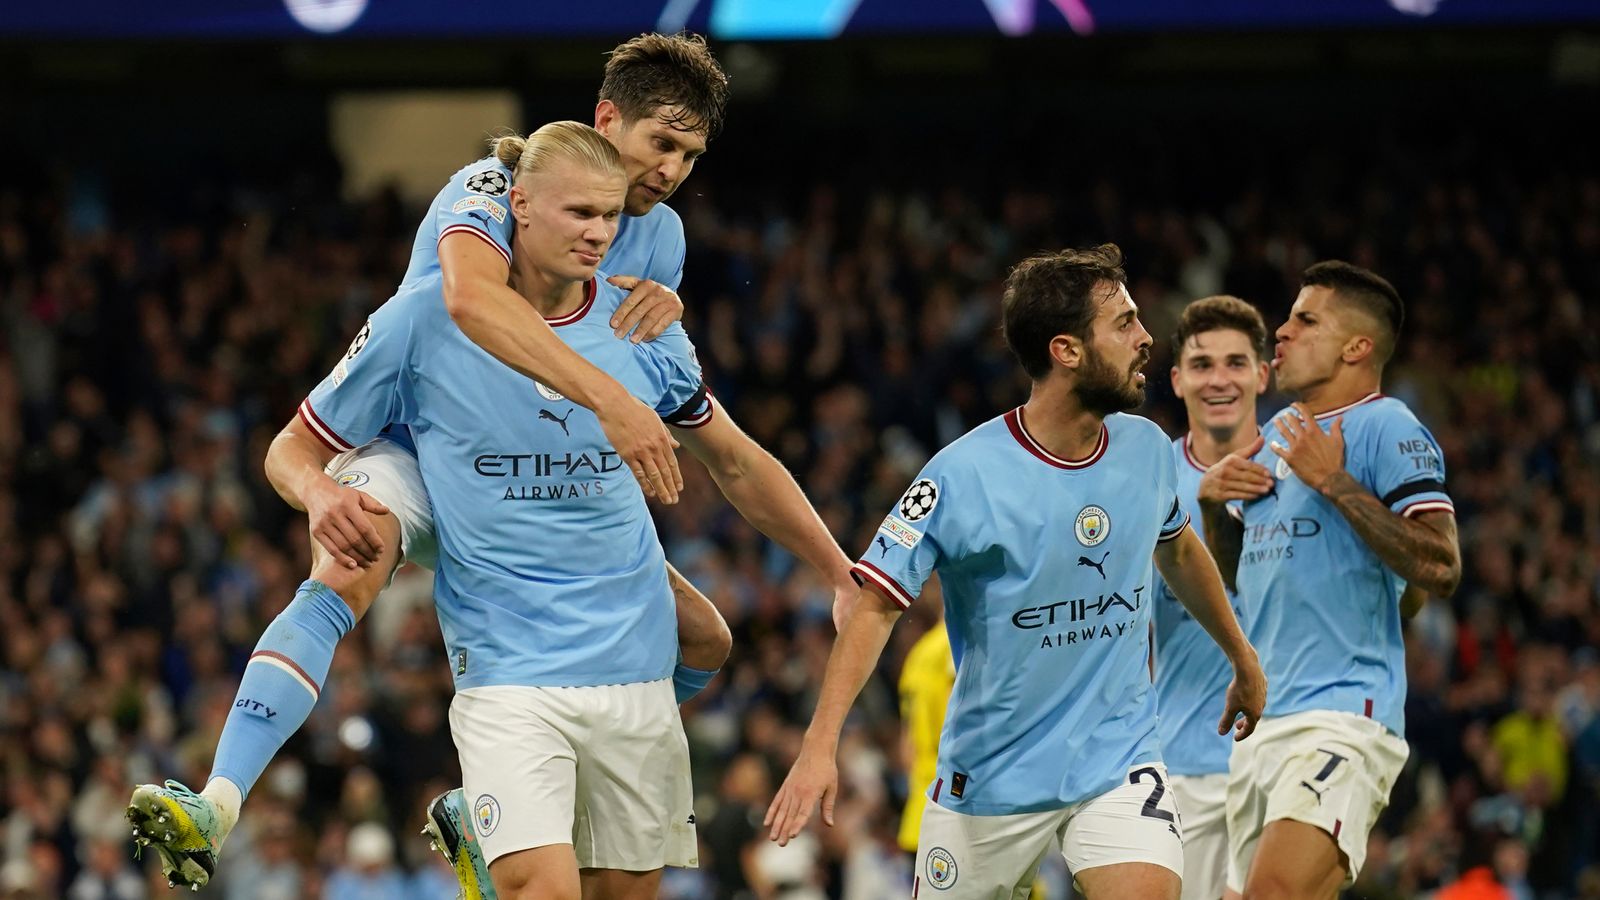 Man City 2-1 Borussia Dortmund: Erling Haaland helps Pep Guardiola's side come from behind to win late on | Football News | Sky Sports